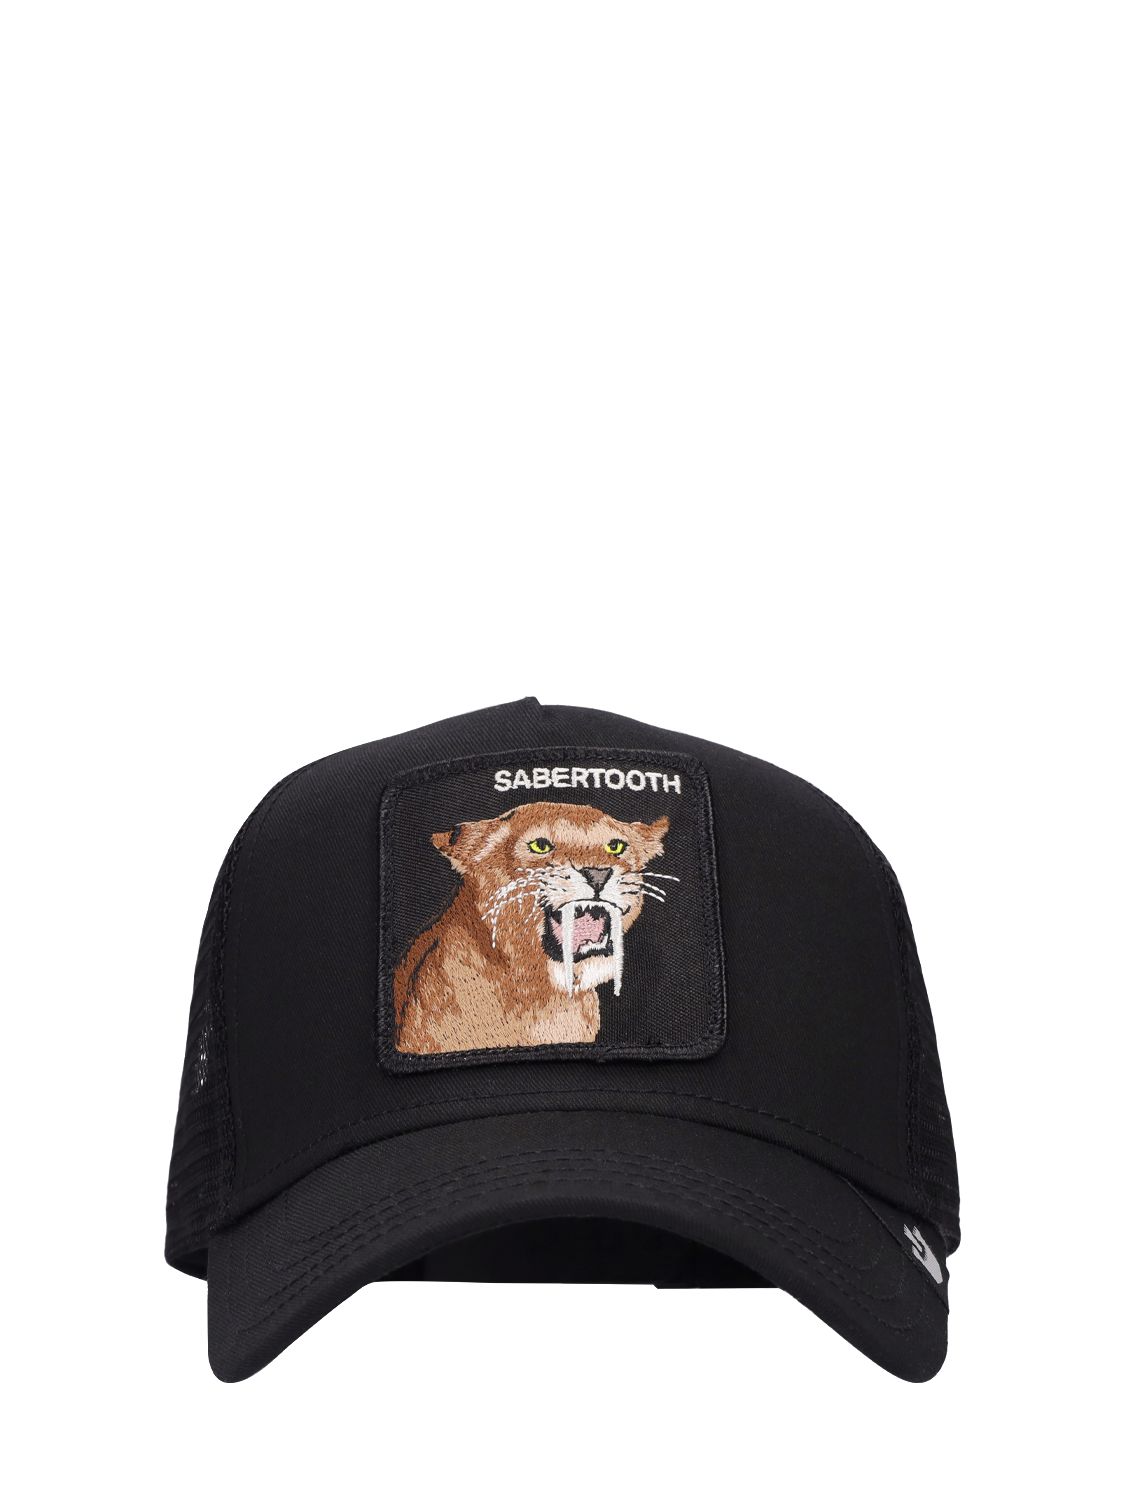 The Sabretooth Trucker Hat W/ Patch